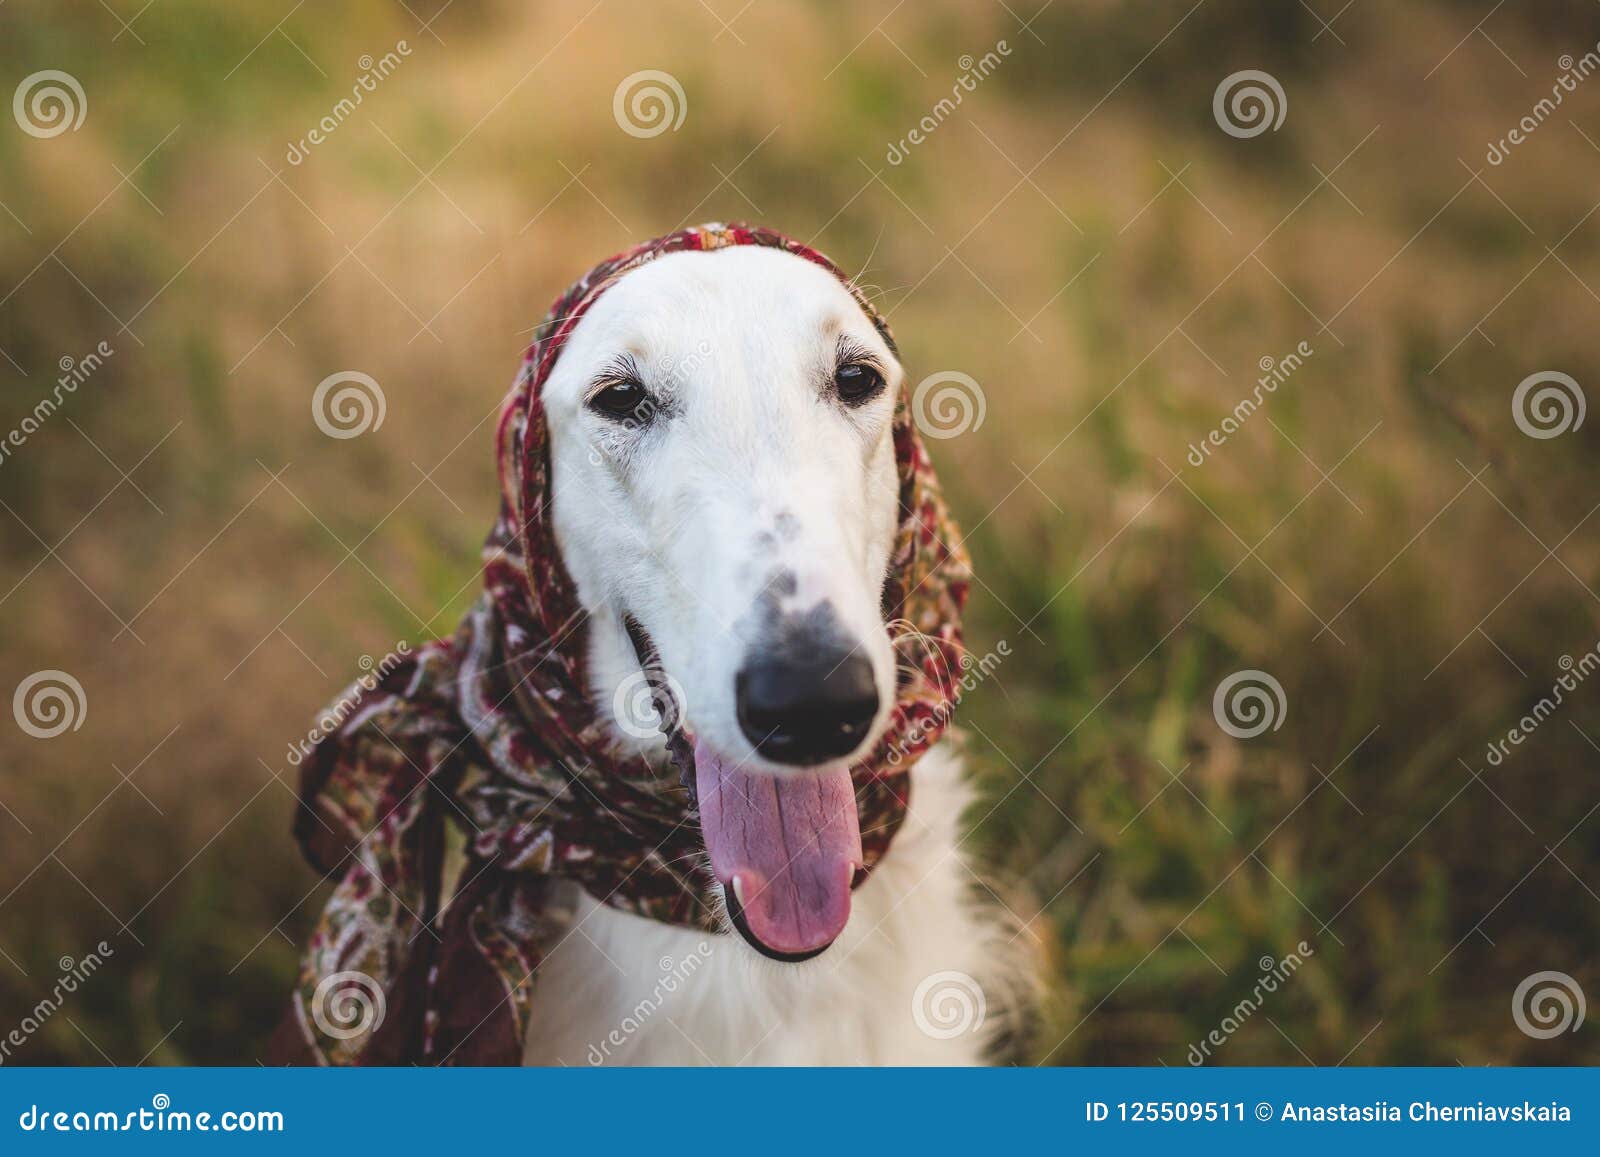 Close Up Portrait Of Gorgeous Russian Borzoi Dog In The Scarf A La Russe On Her Head In The Field Stock Image Image Of Nature Hound 125509511